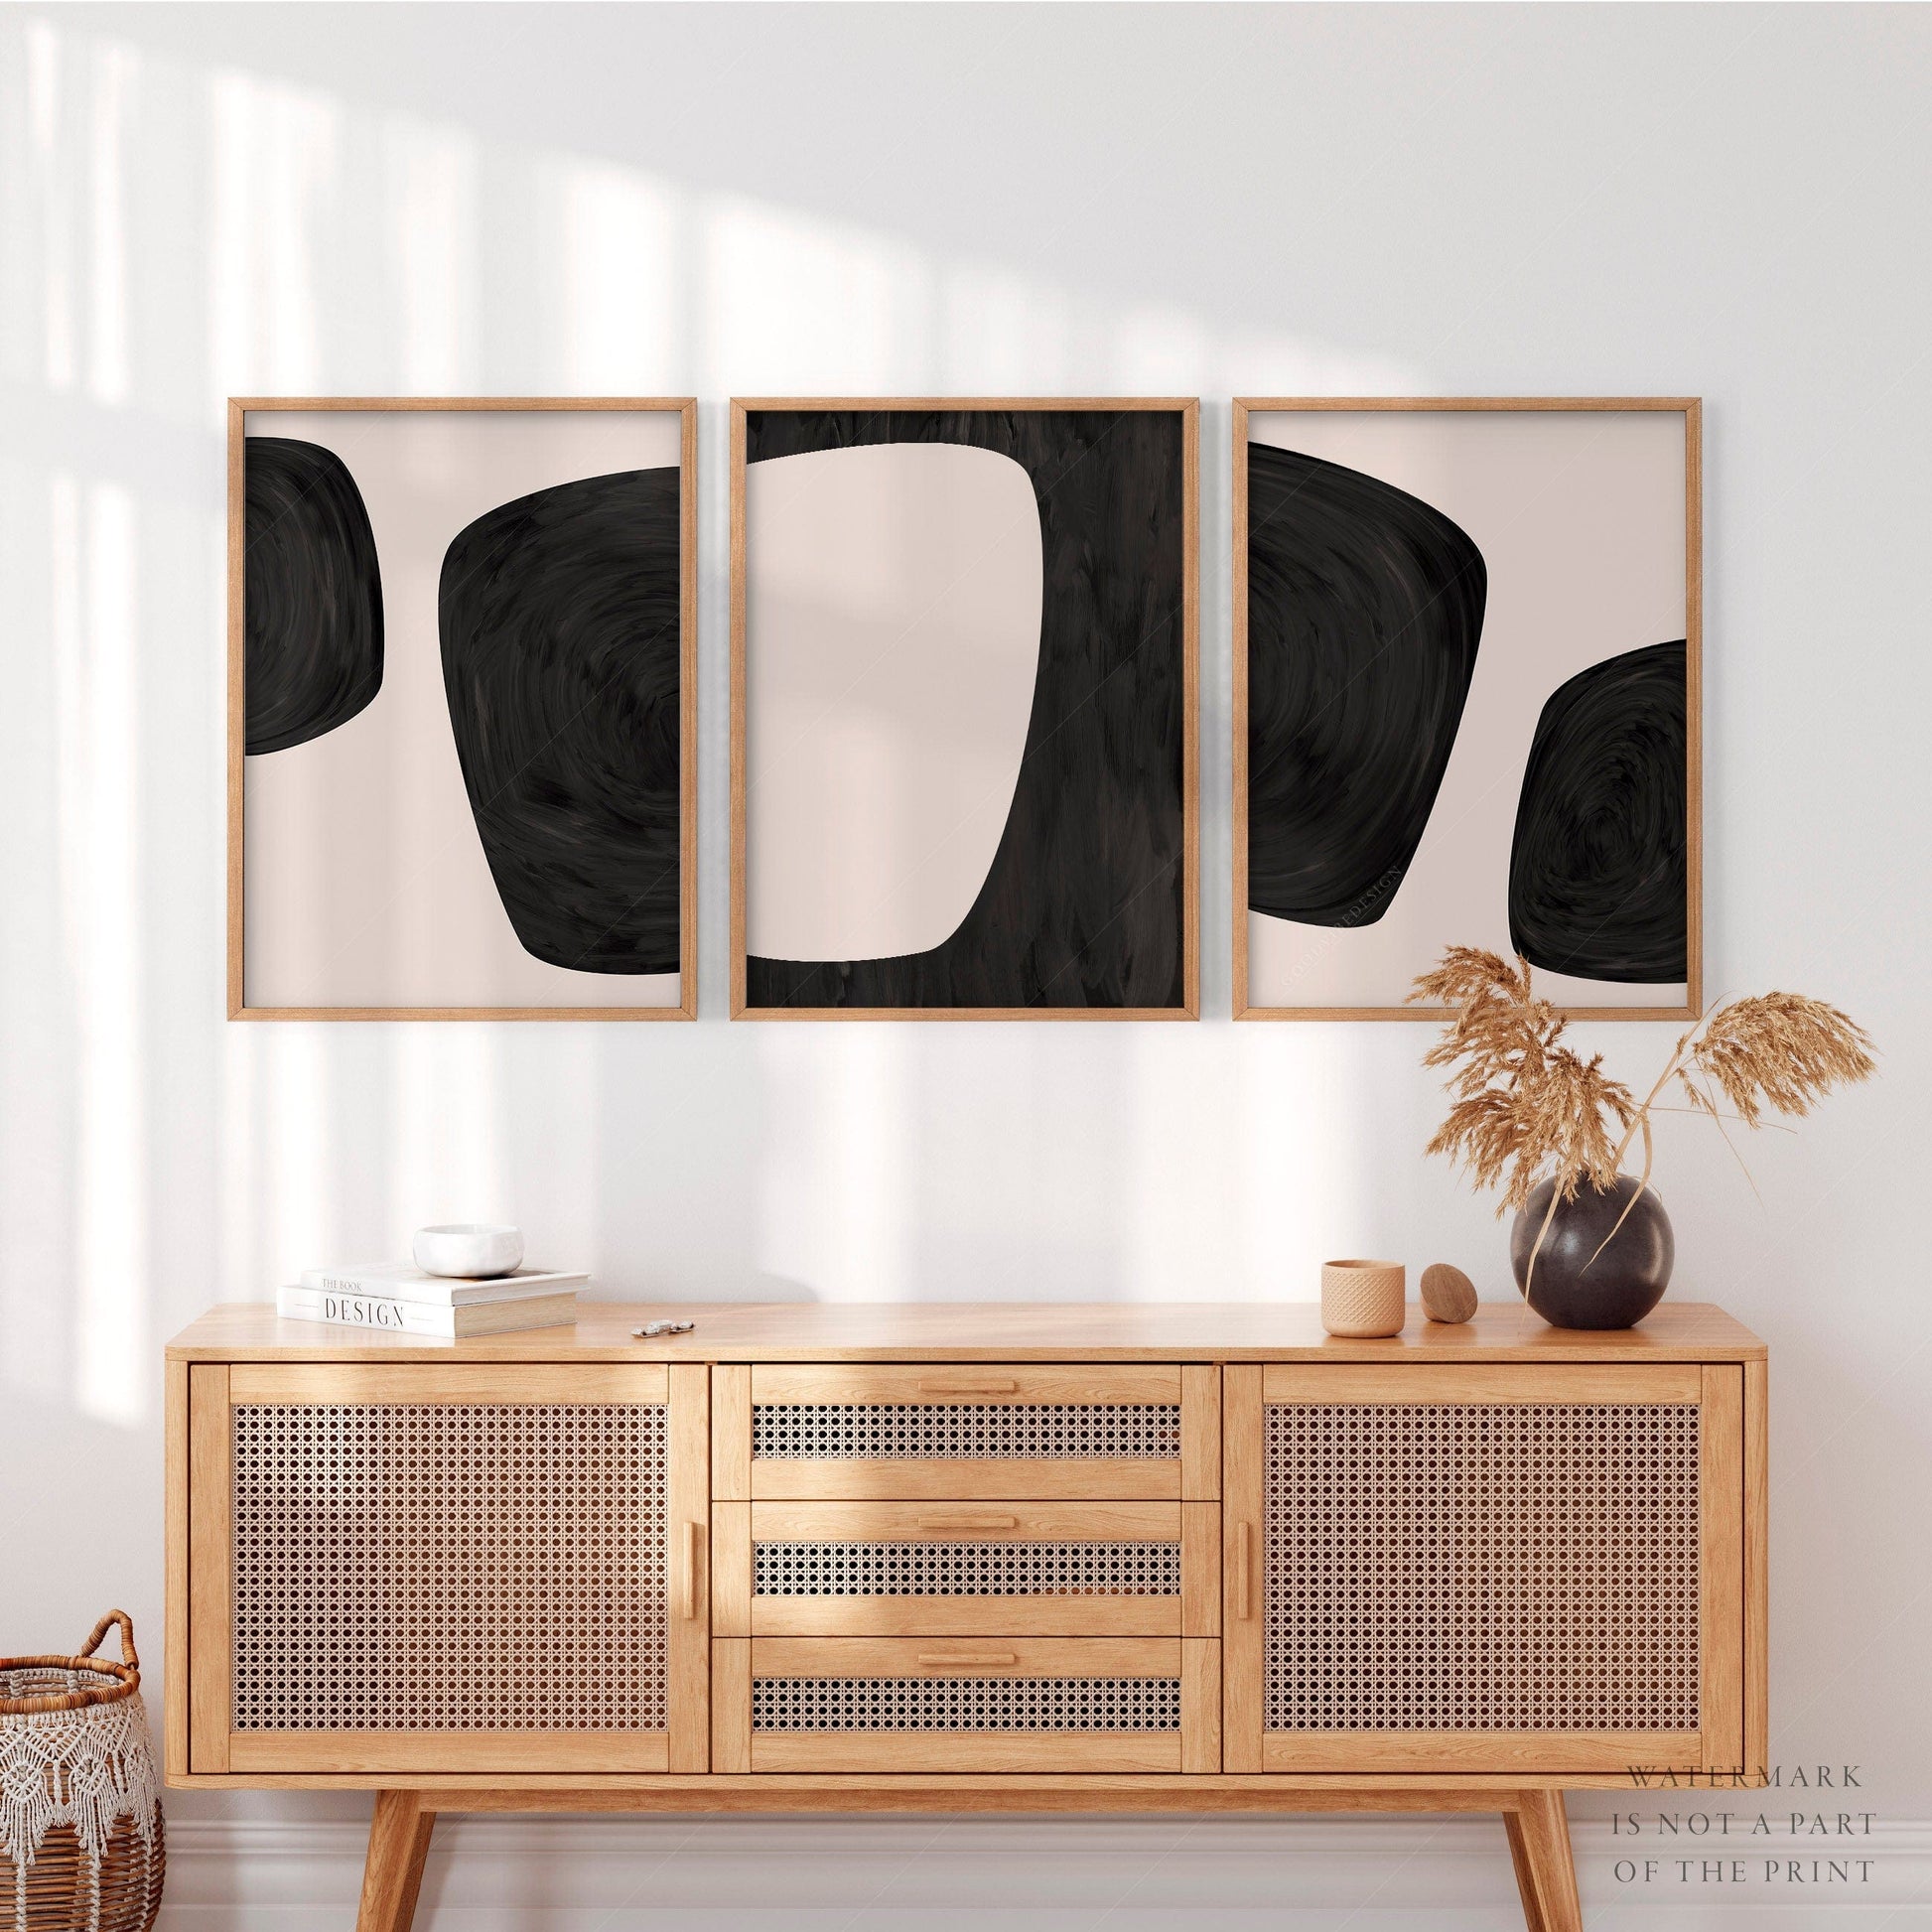 Home Poster Decor Set of 3 Modern Set of 3 Art, Neutral Tones, Beige Black Minimalist, Gallery Wall, Abstract Wall Art, Simple Shapes, Line Print, Living Wall Decor 11